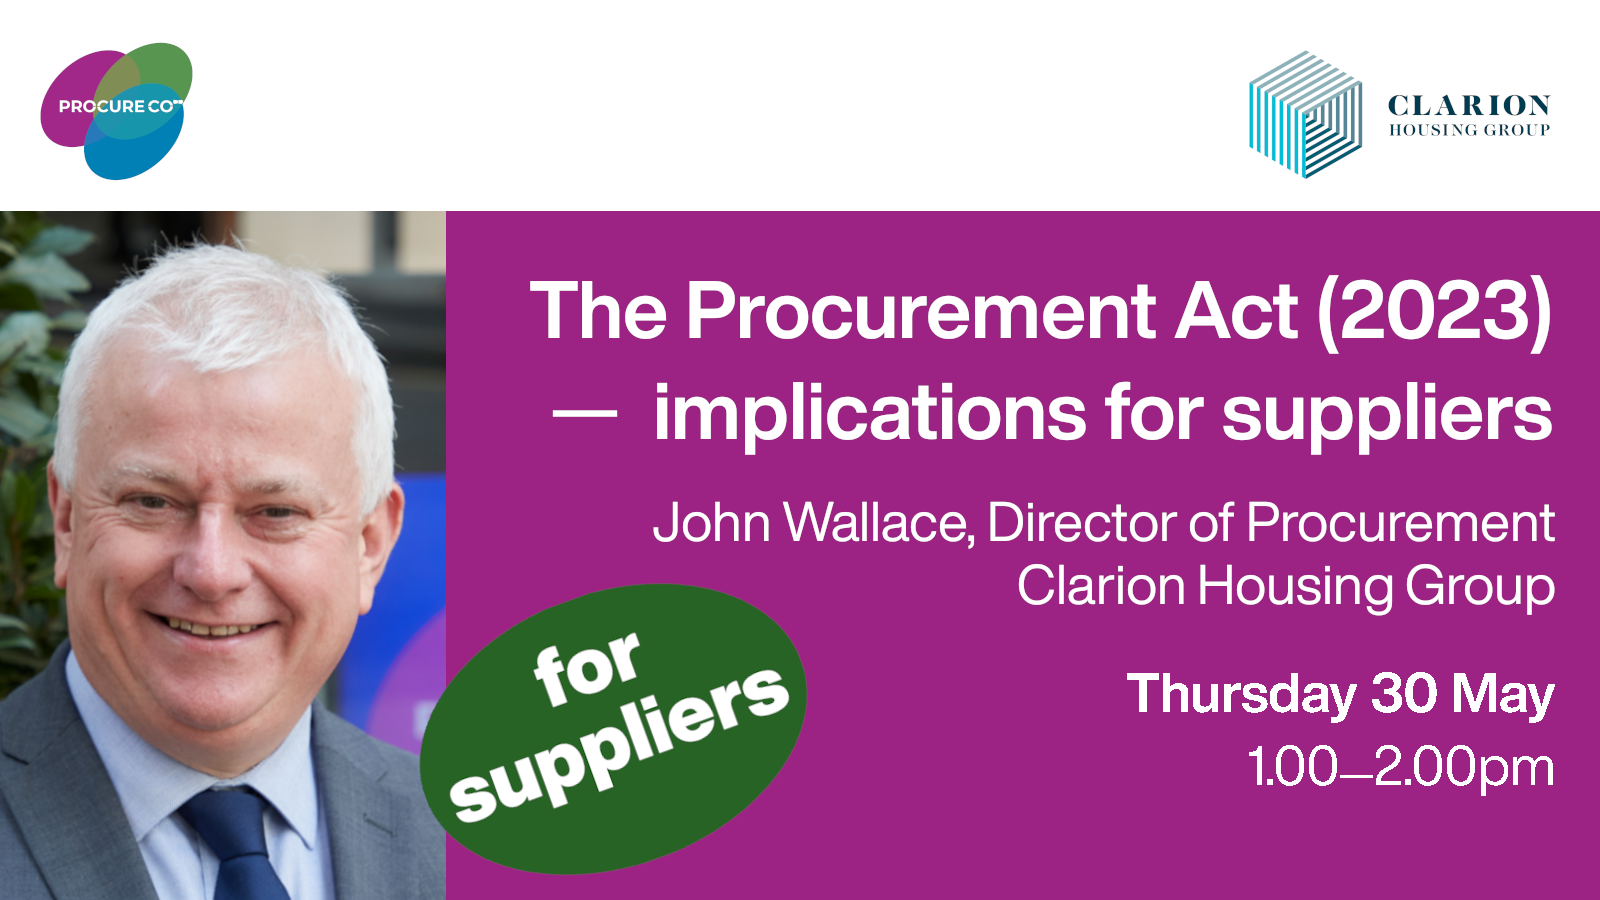 John Wallace on 'The Procurement Act (2023) – implications for suppliers